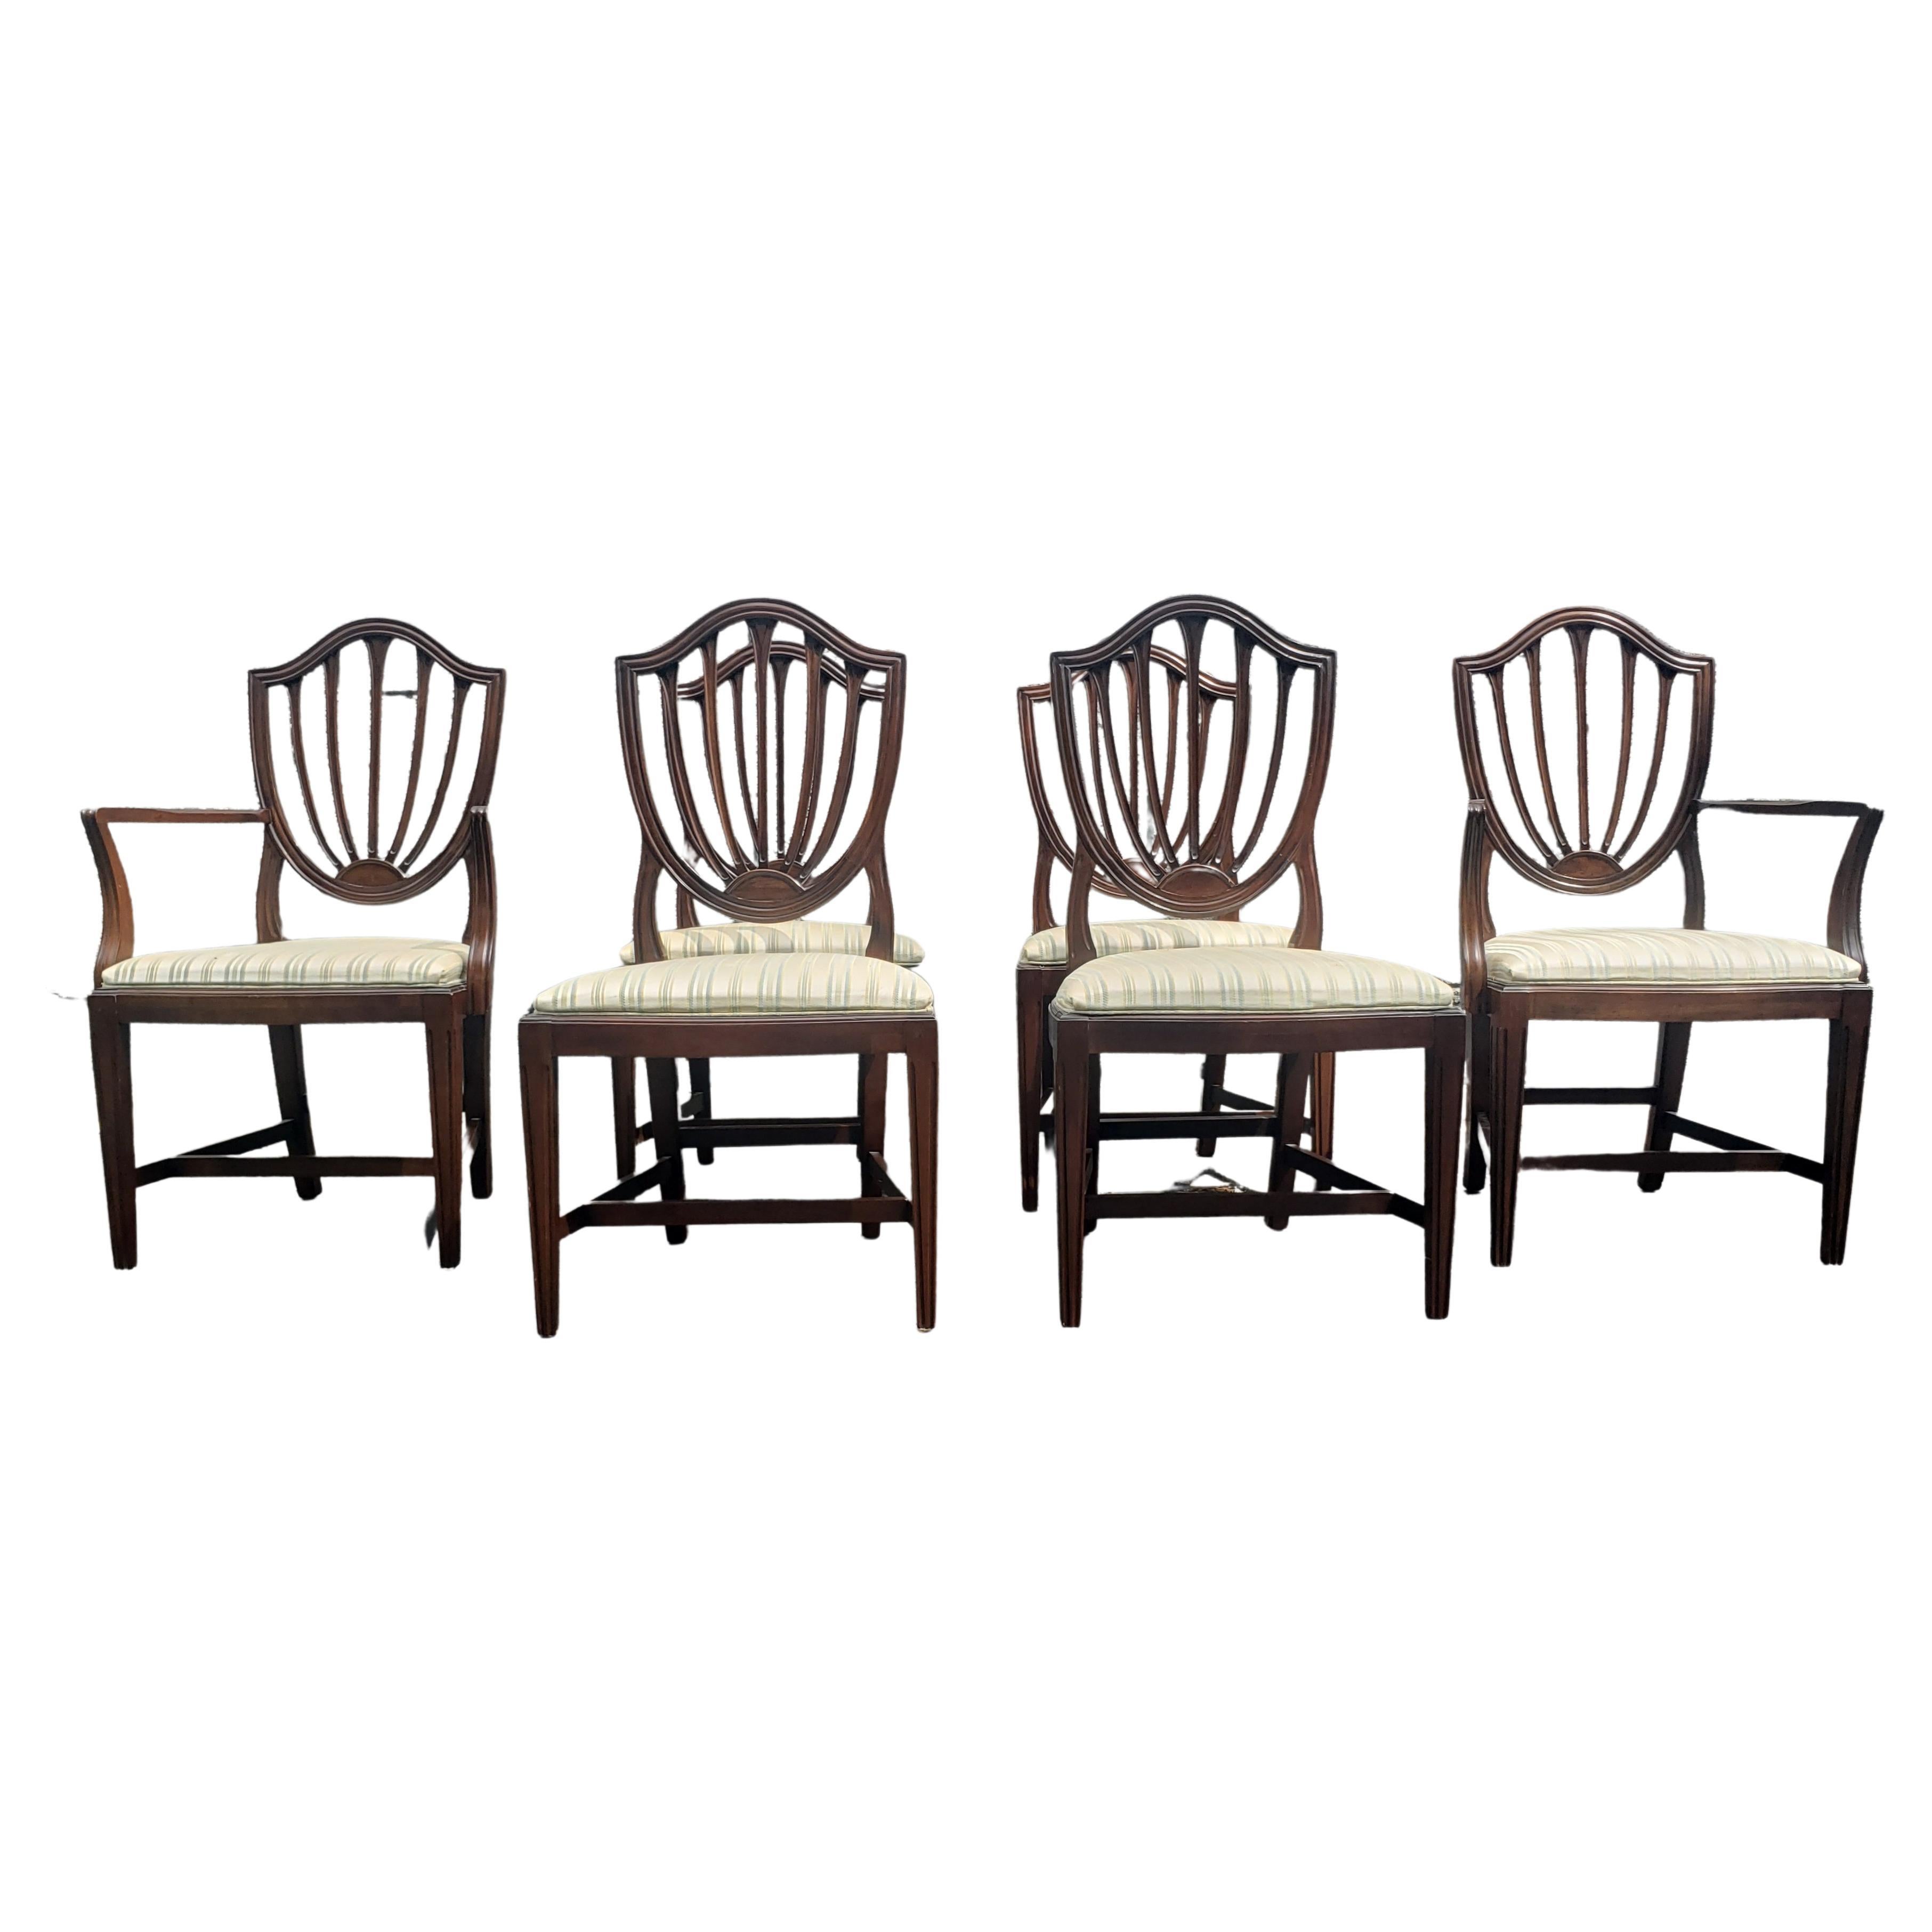 Ethan-Allen Georgian Ct Mahogany and Upholstered Shield Back Dining Chairs, Set